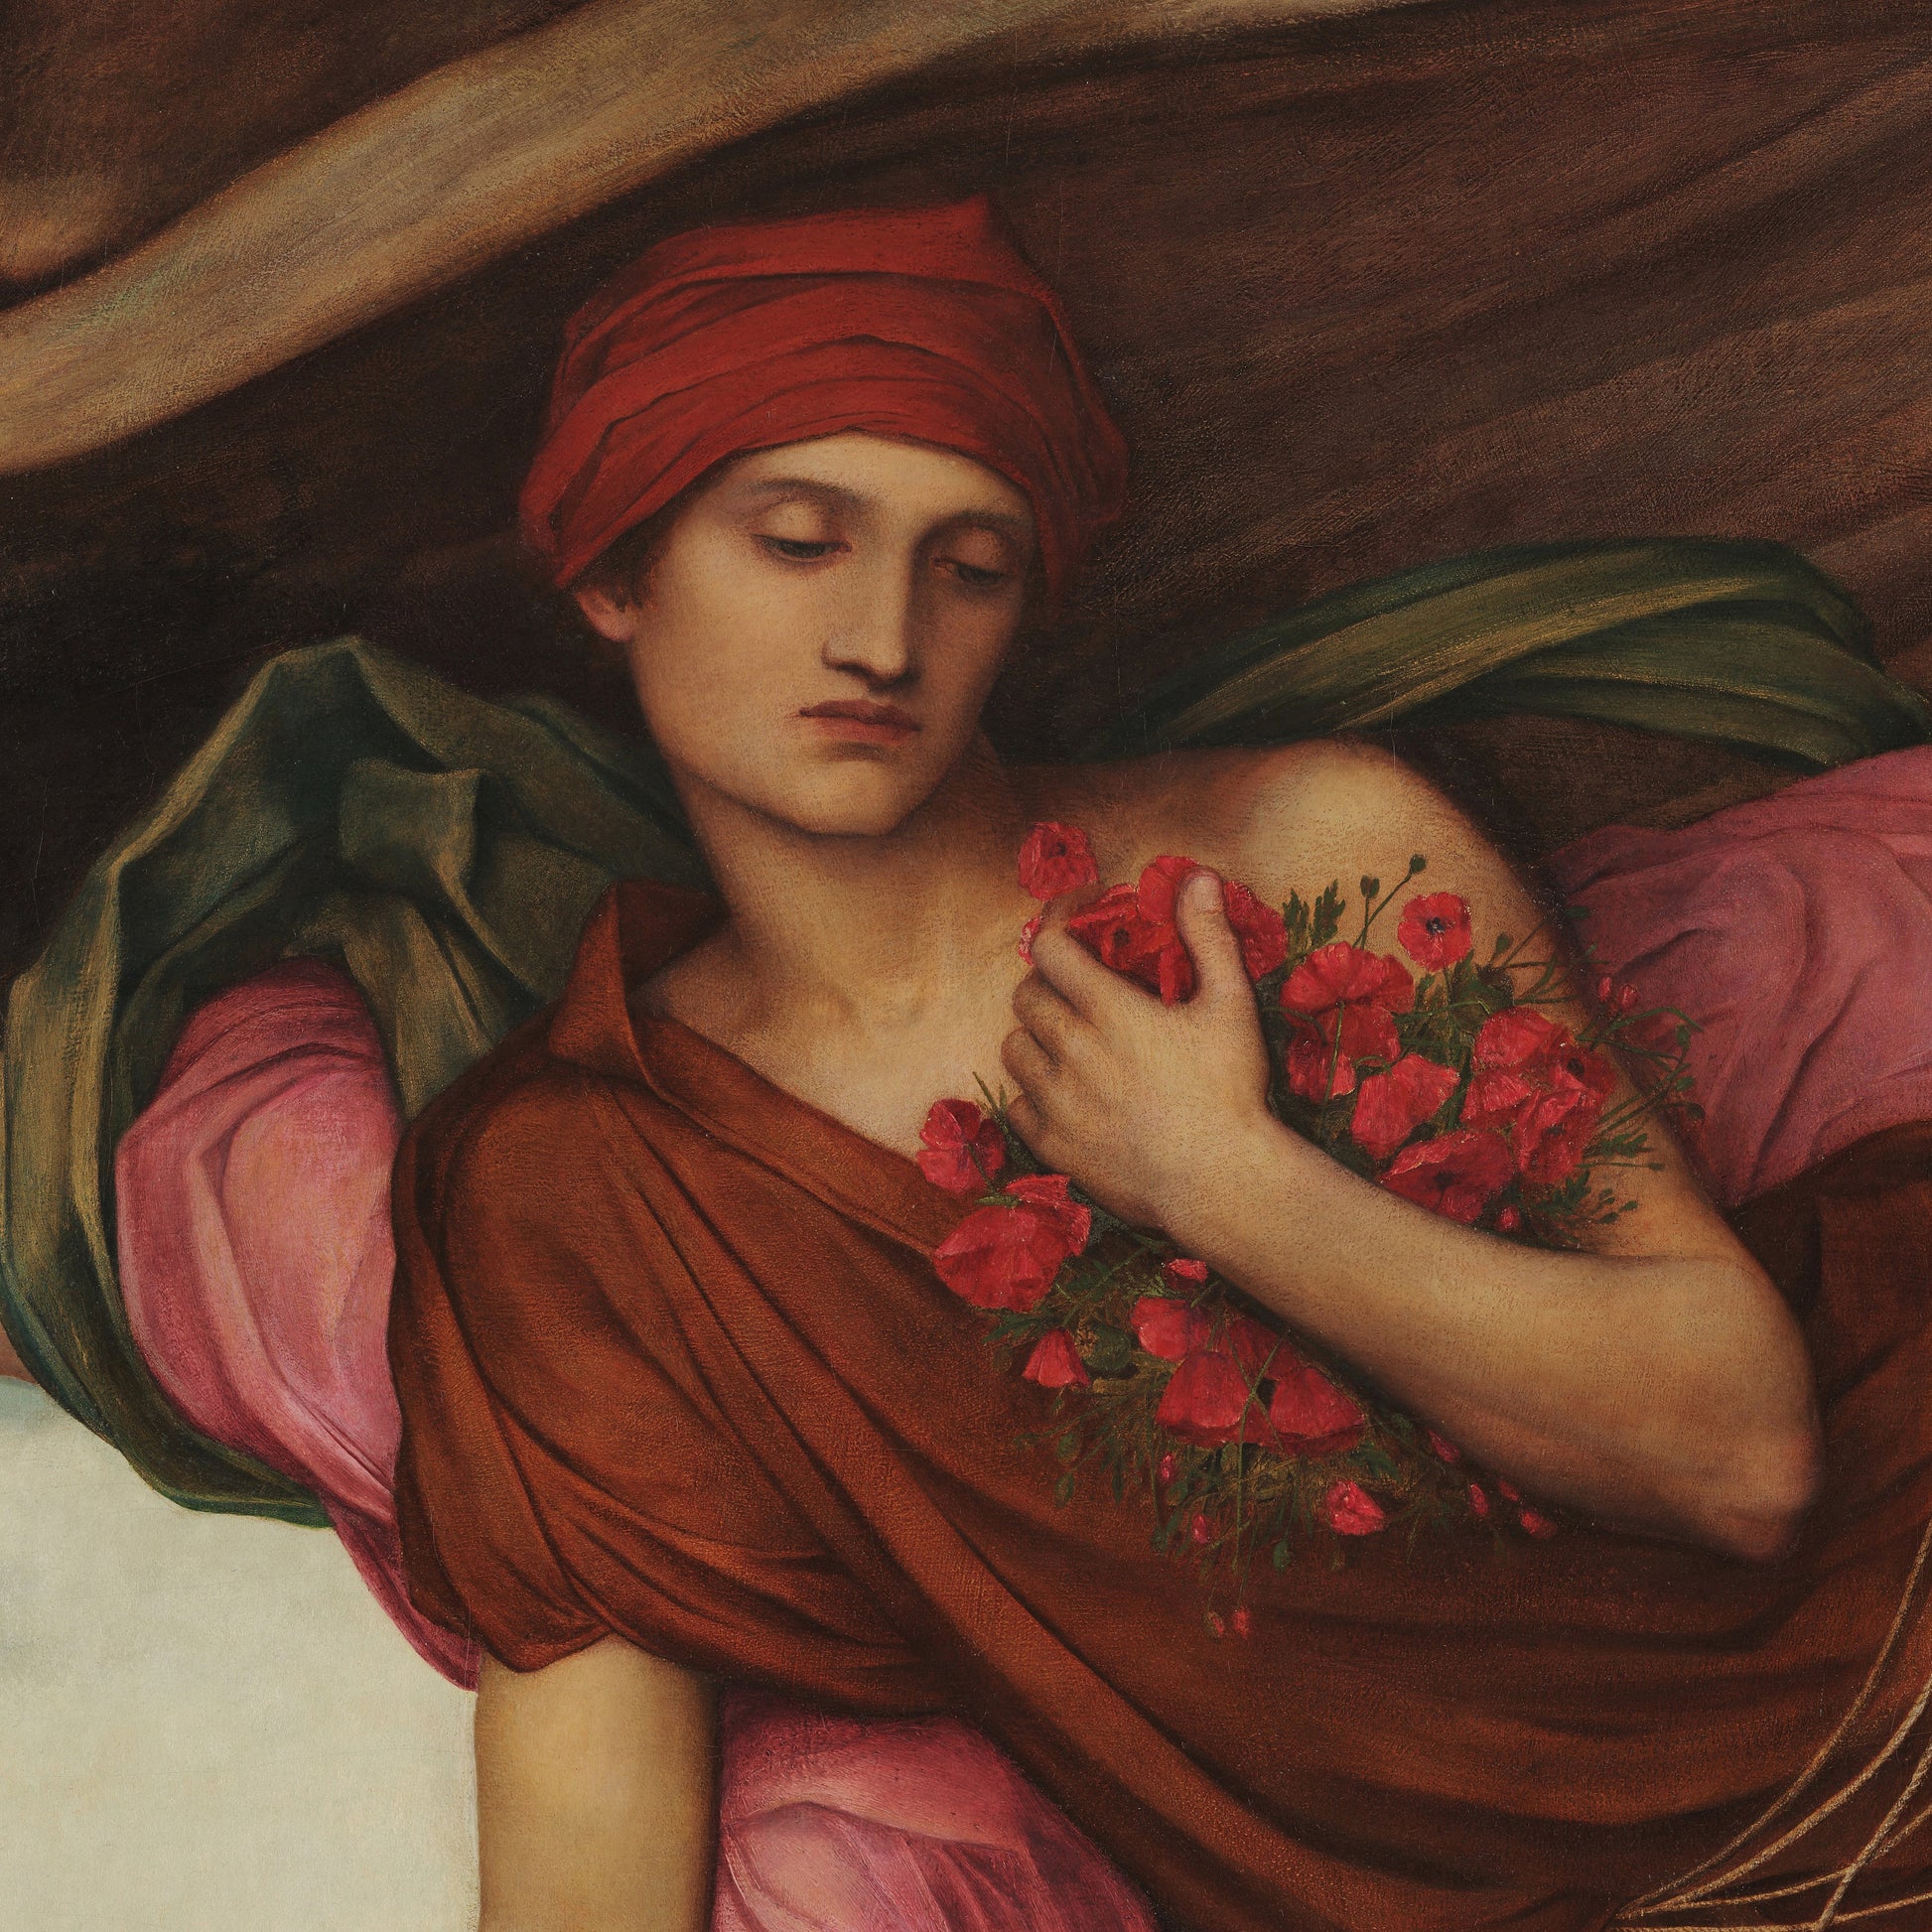 Night and Sleep by Evelyn De Morgan, 3d Printed with texture and brush strokes looks like original oil-painting, code:100